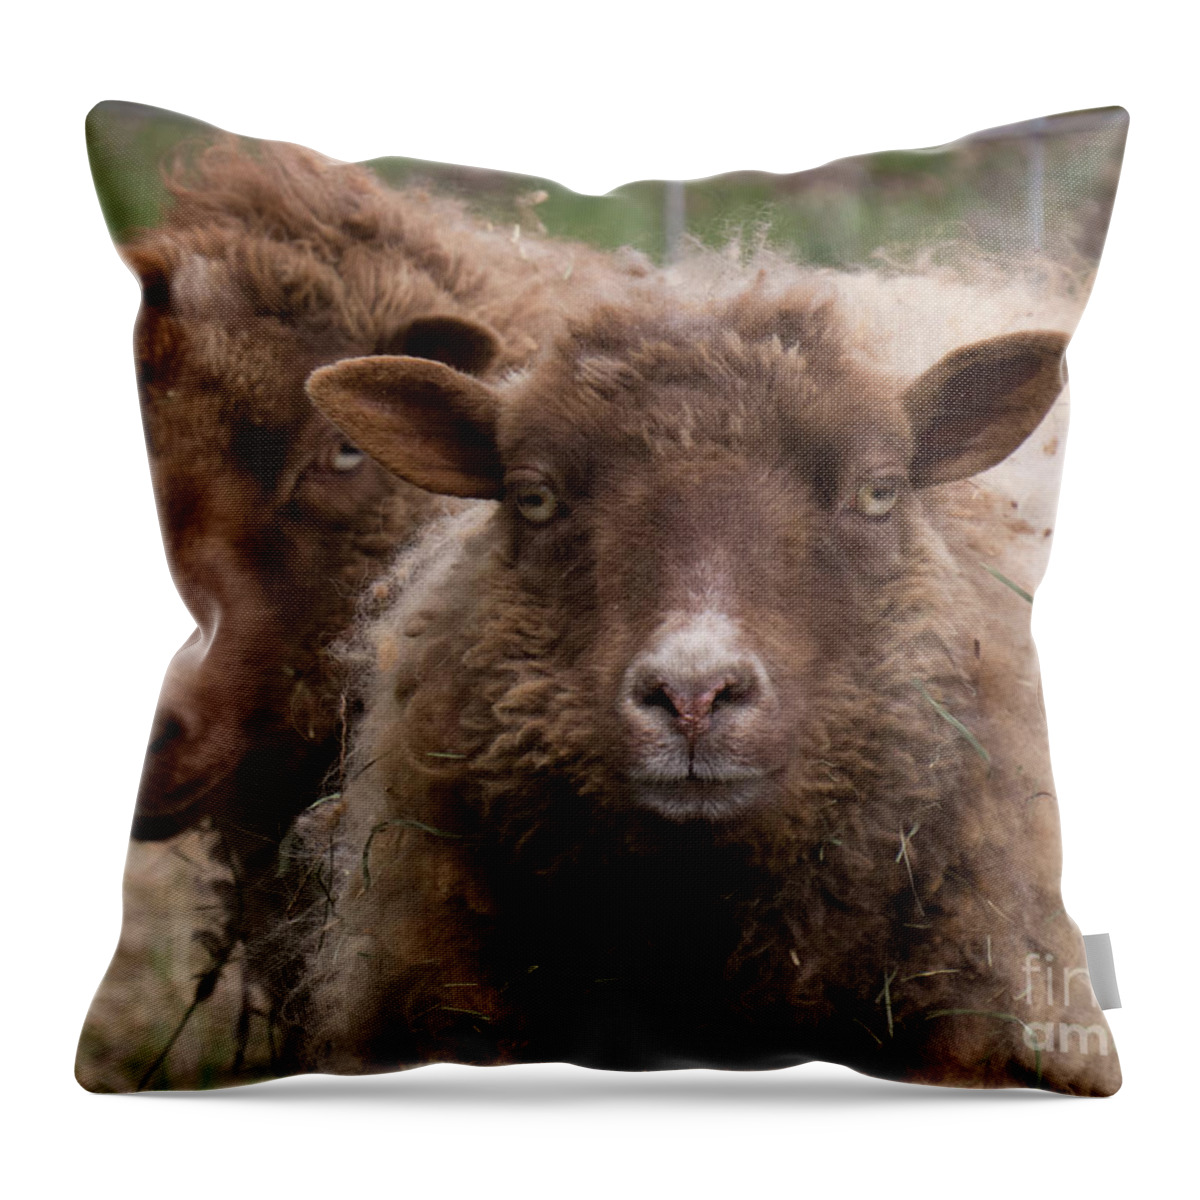 Sheep Throw Pillow featuring the photograph Two Sheep Getting Their Photo Taken by Christy Garavetto